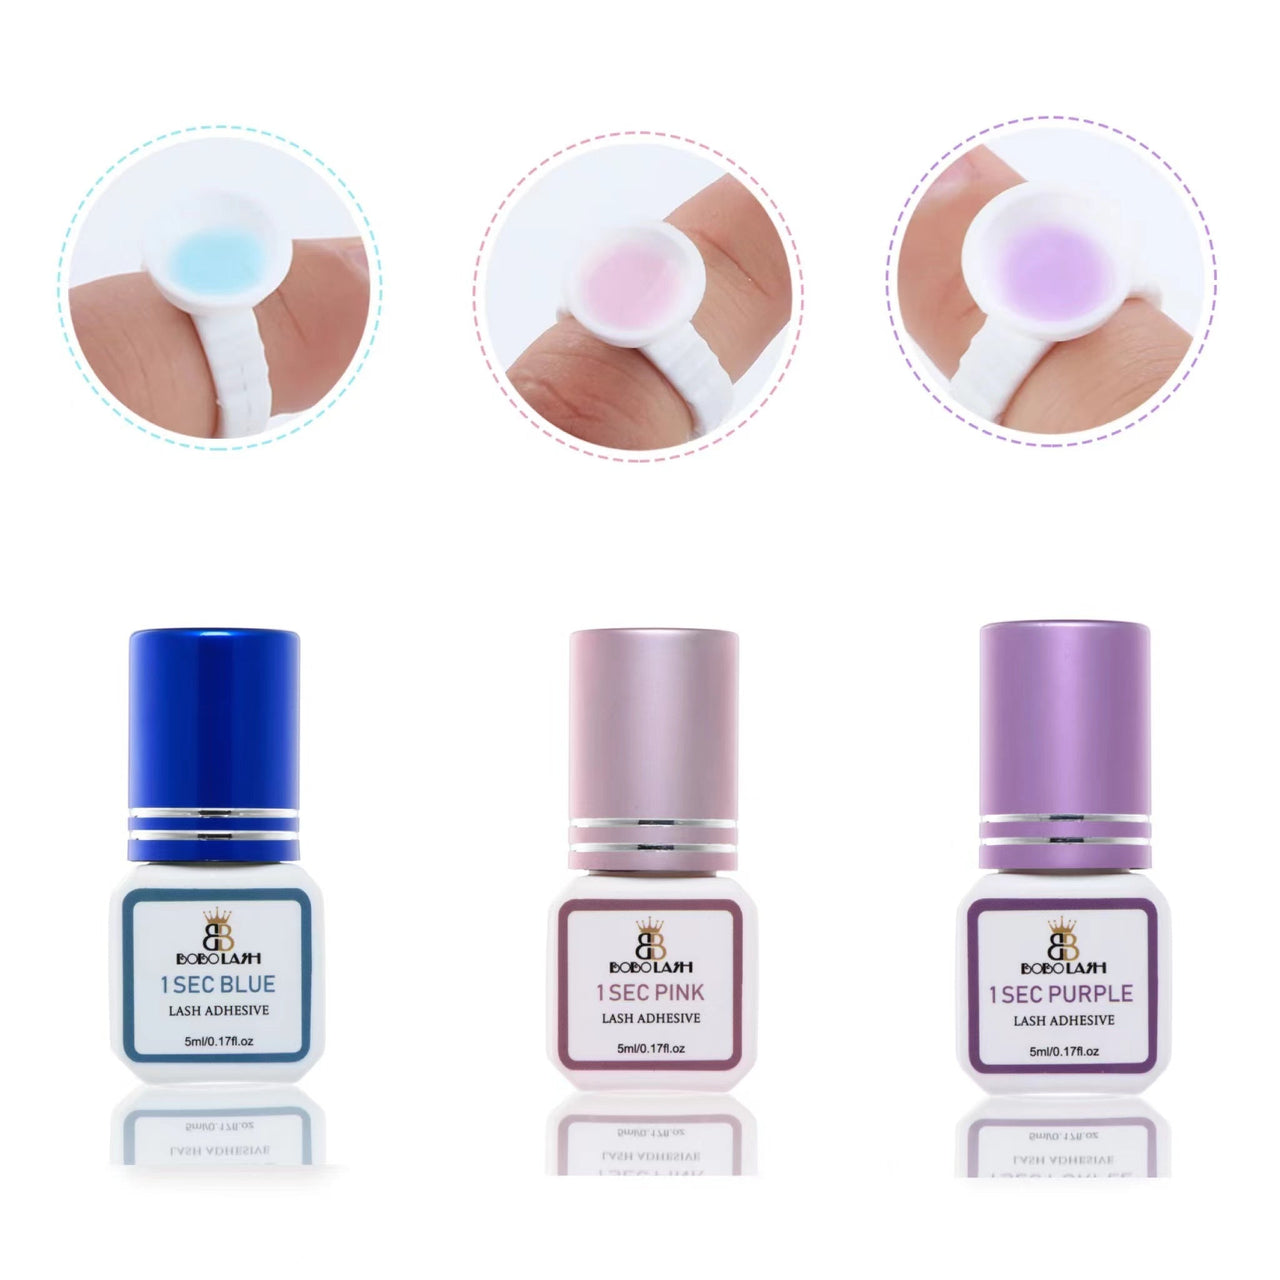 1 Second Clear & Colorful Jelly Lash Adhesive Kit